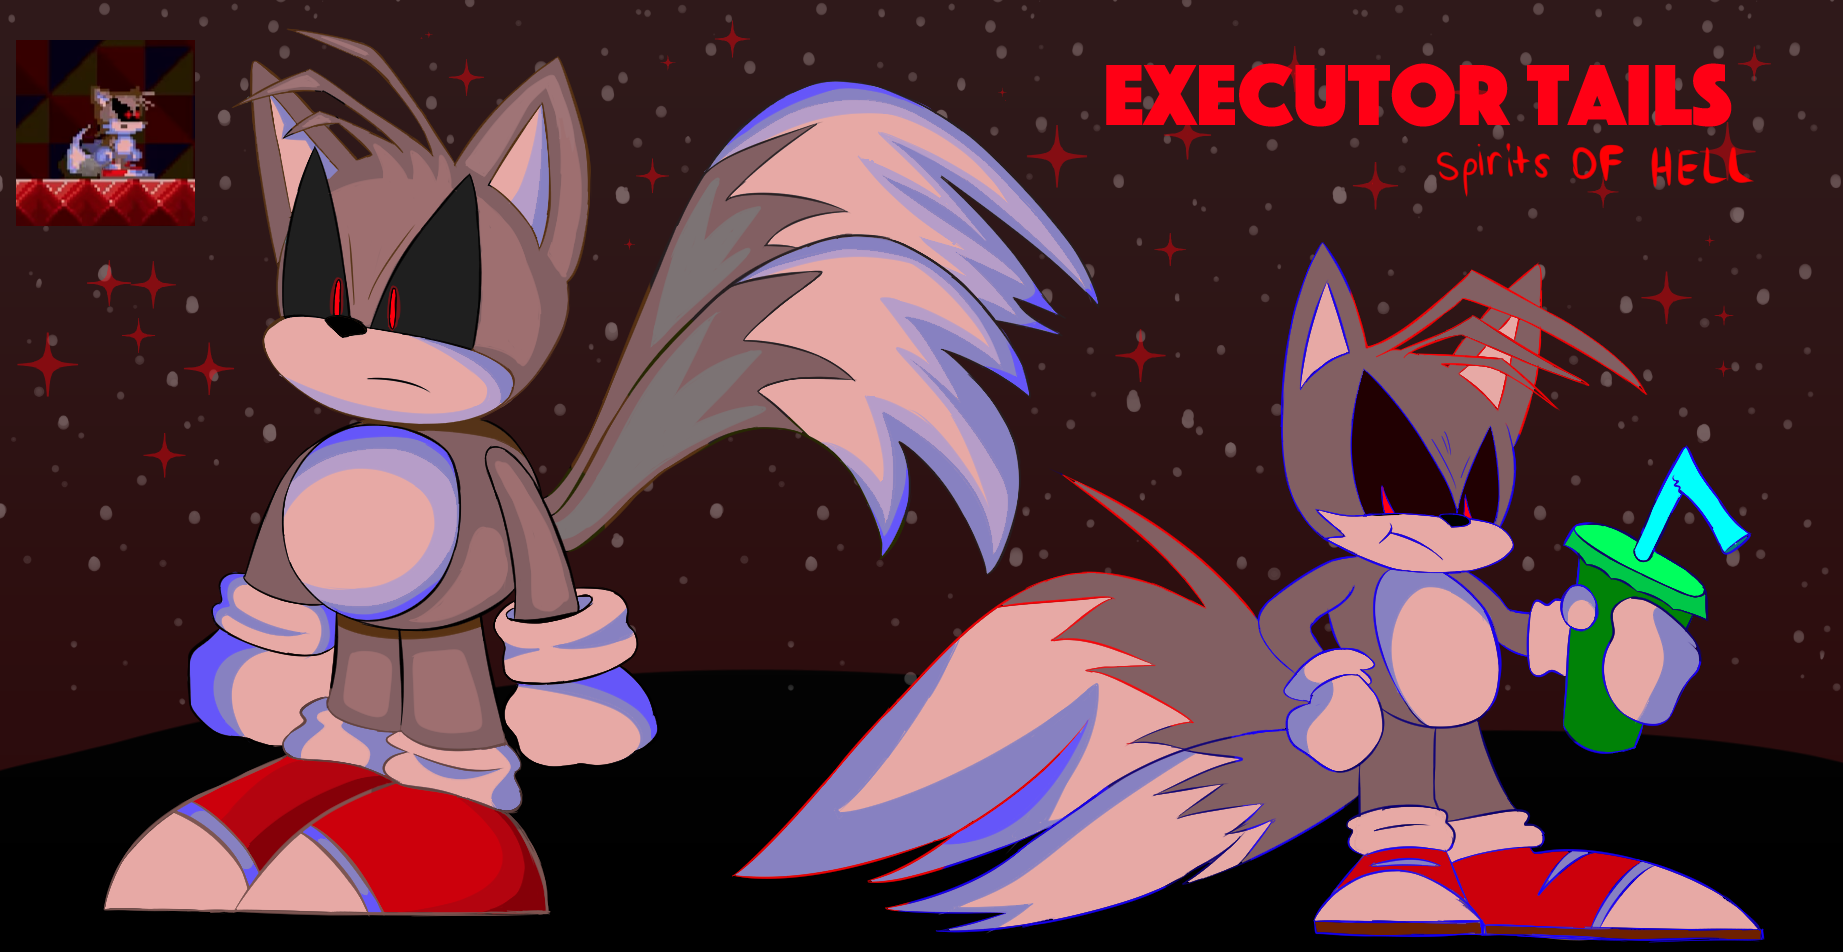 Tails.exe body part by SonicJrthecoolest on DeviantArt